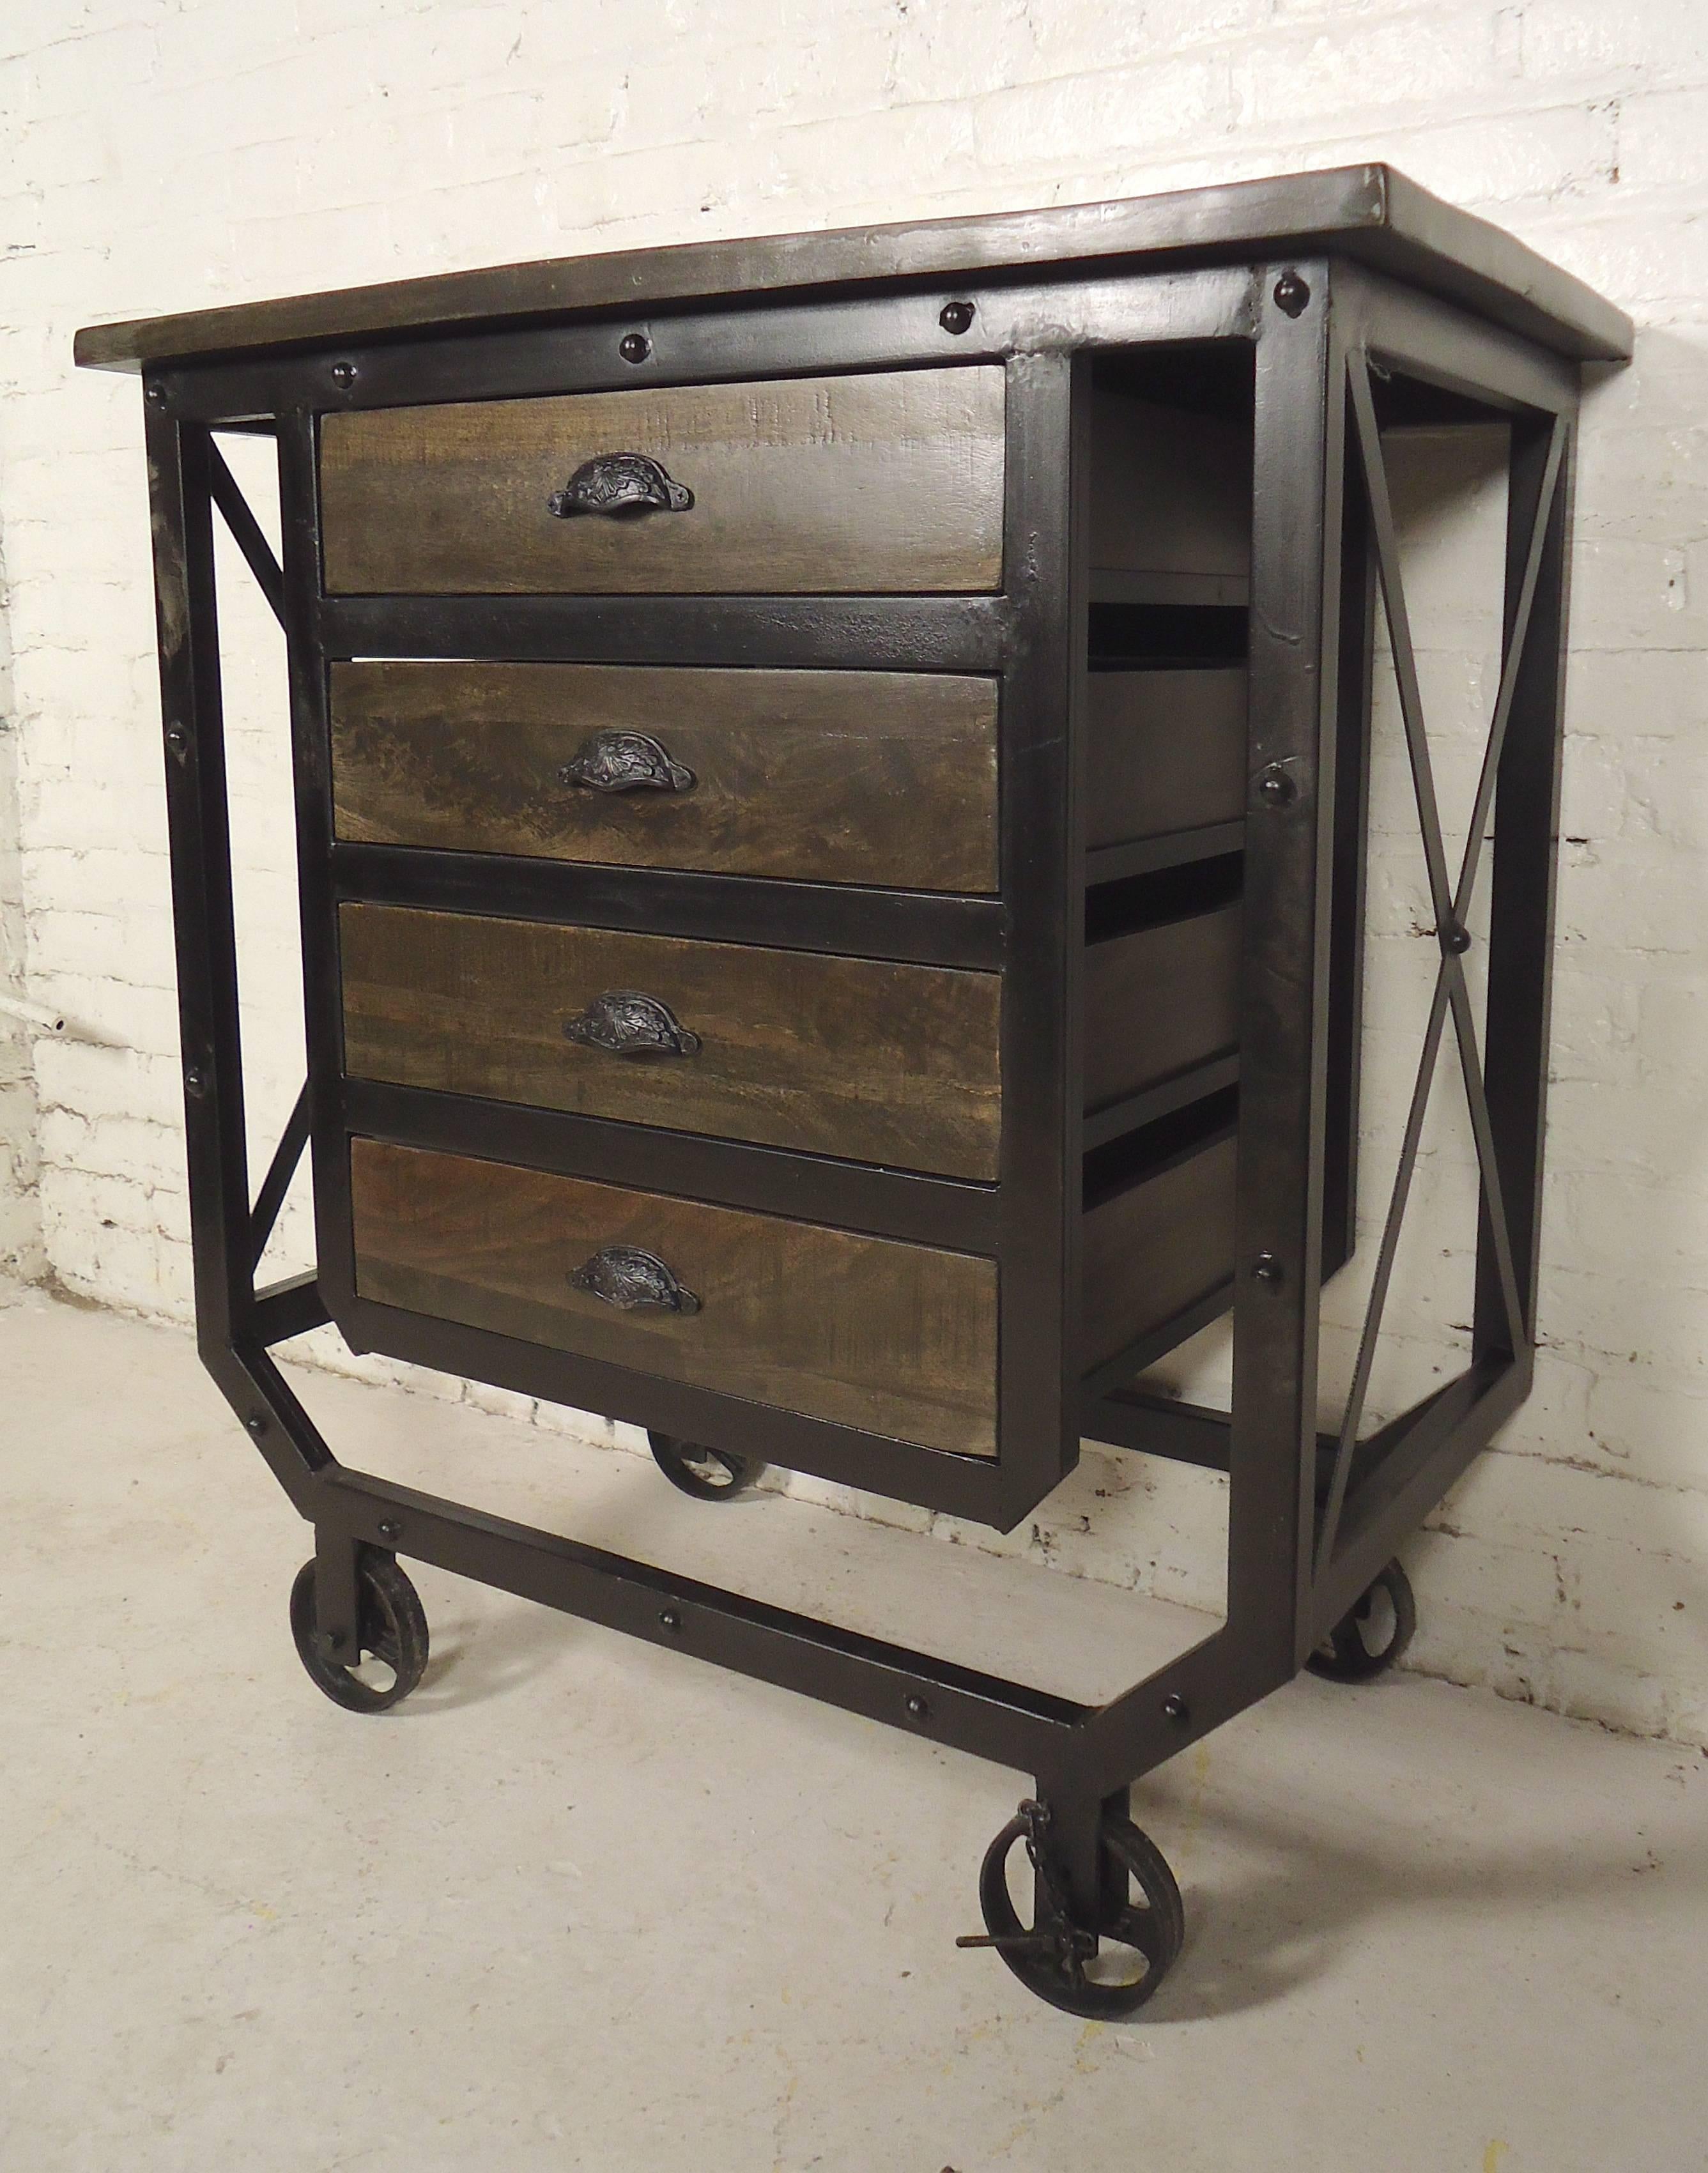 Heavy duty Machine Age style cart with strong reclaimed iron and wood, constructed into this modern rolling storage unit. Black painted metal frame, wood top and drawers, great for living room, kitchen or bathroom use. Wheels can lock.

(Please